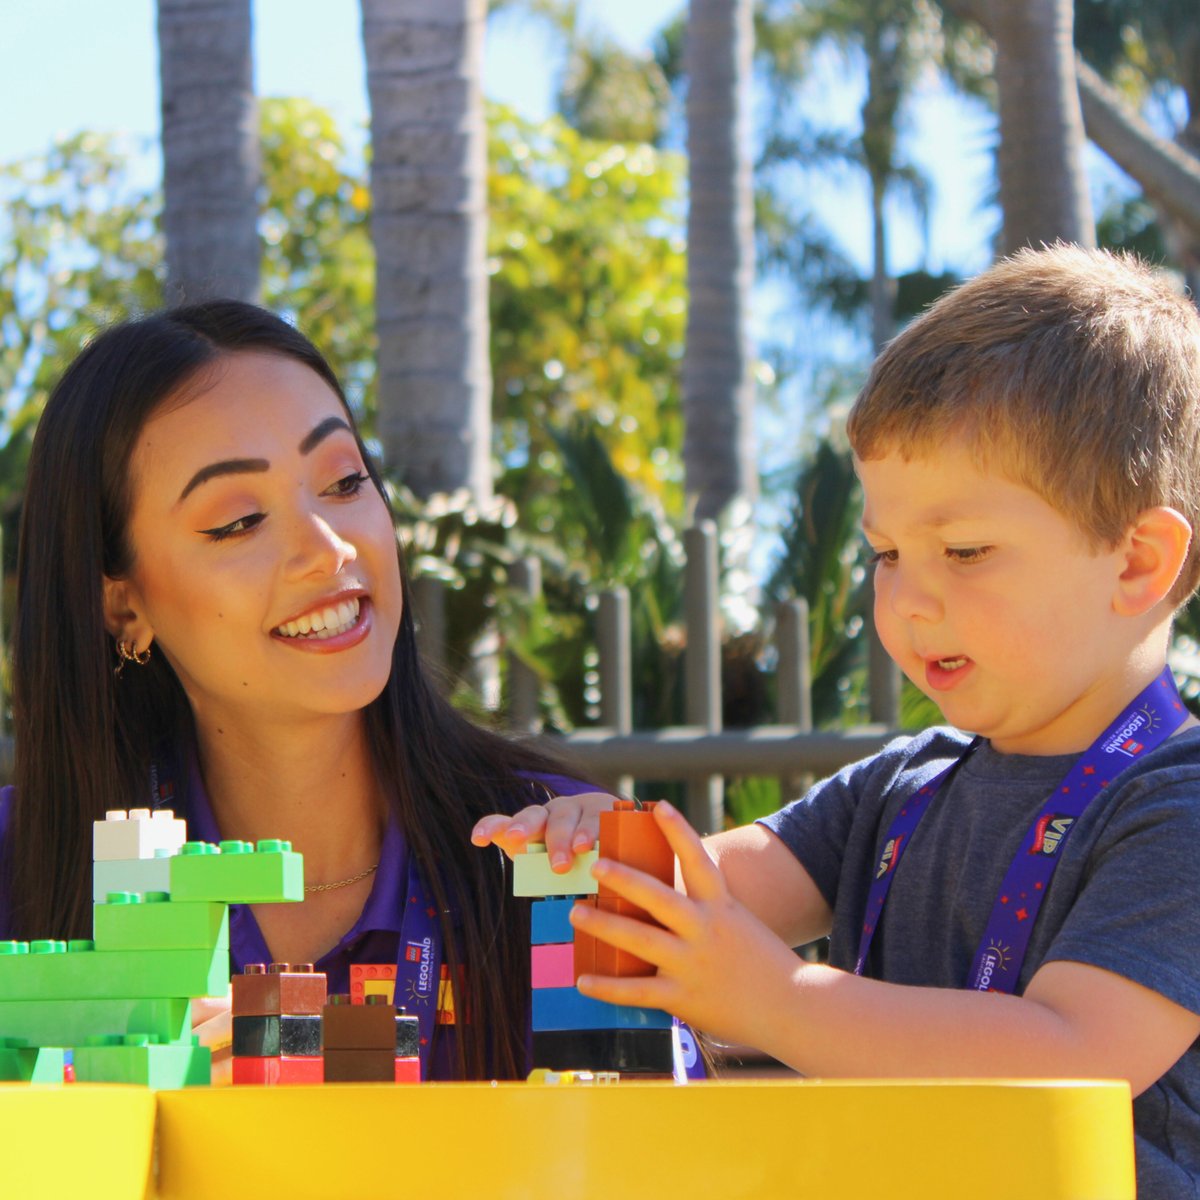 Have your own built-in best friend for the day with our exclusive VIP experience! 

☺️ Hassle-Free Planning

🧱 Exclusive Model Shop Tour

❤️ Created For Children

✨ Personal VIP Host

🎢 Priority Ride Access

legolandcalifornia.visitlink.me/xZN6Yh

#VIP #BestDayEver #VIPExperience